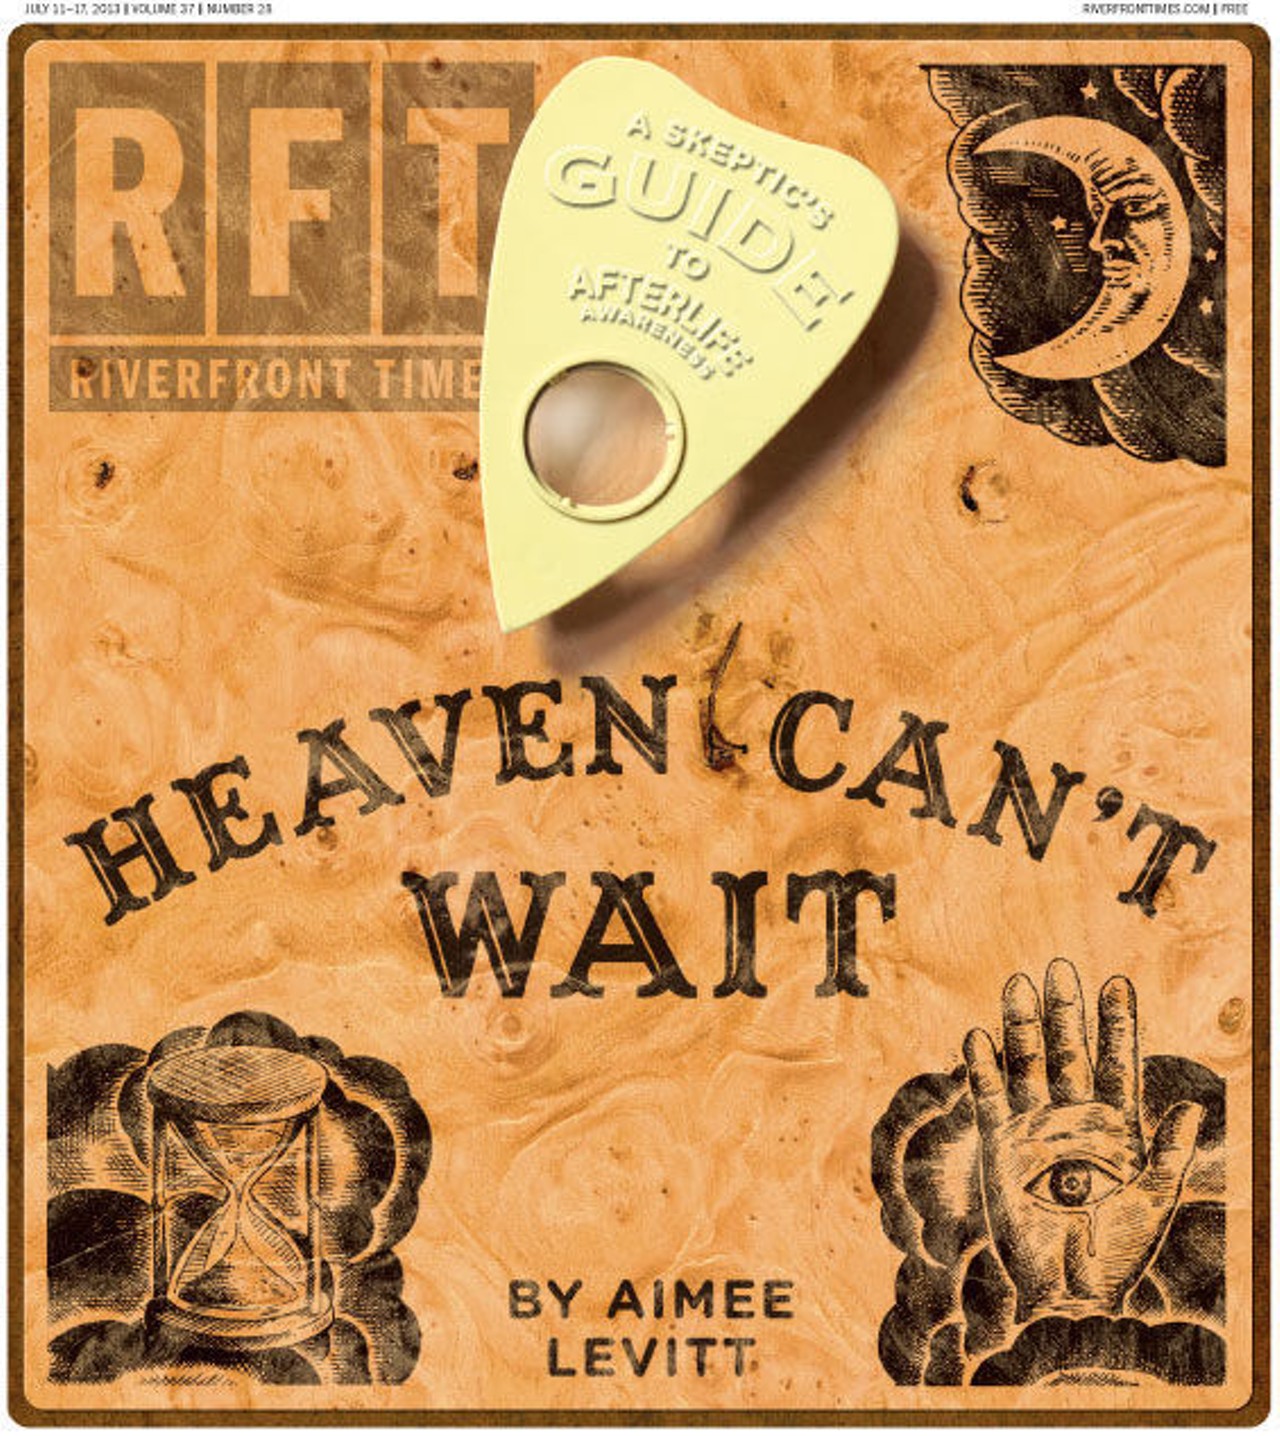 July 11
RFT photo-illustration. Illustrated elements by Mark Andresen. Read "Heaven Can't Wait."